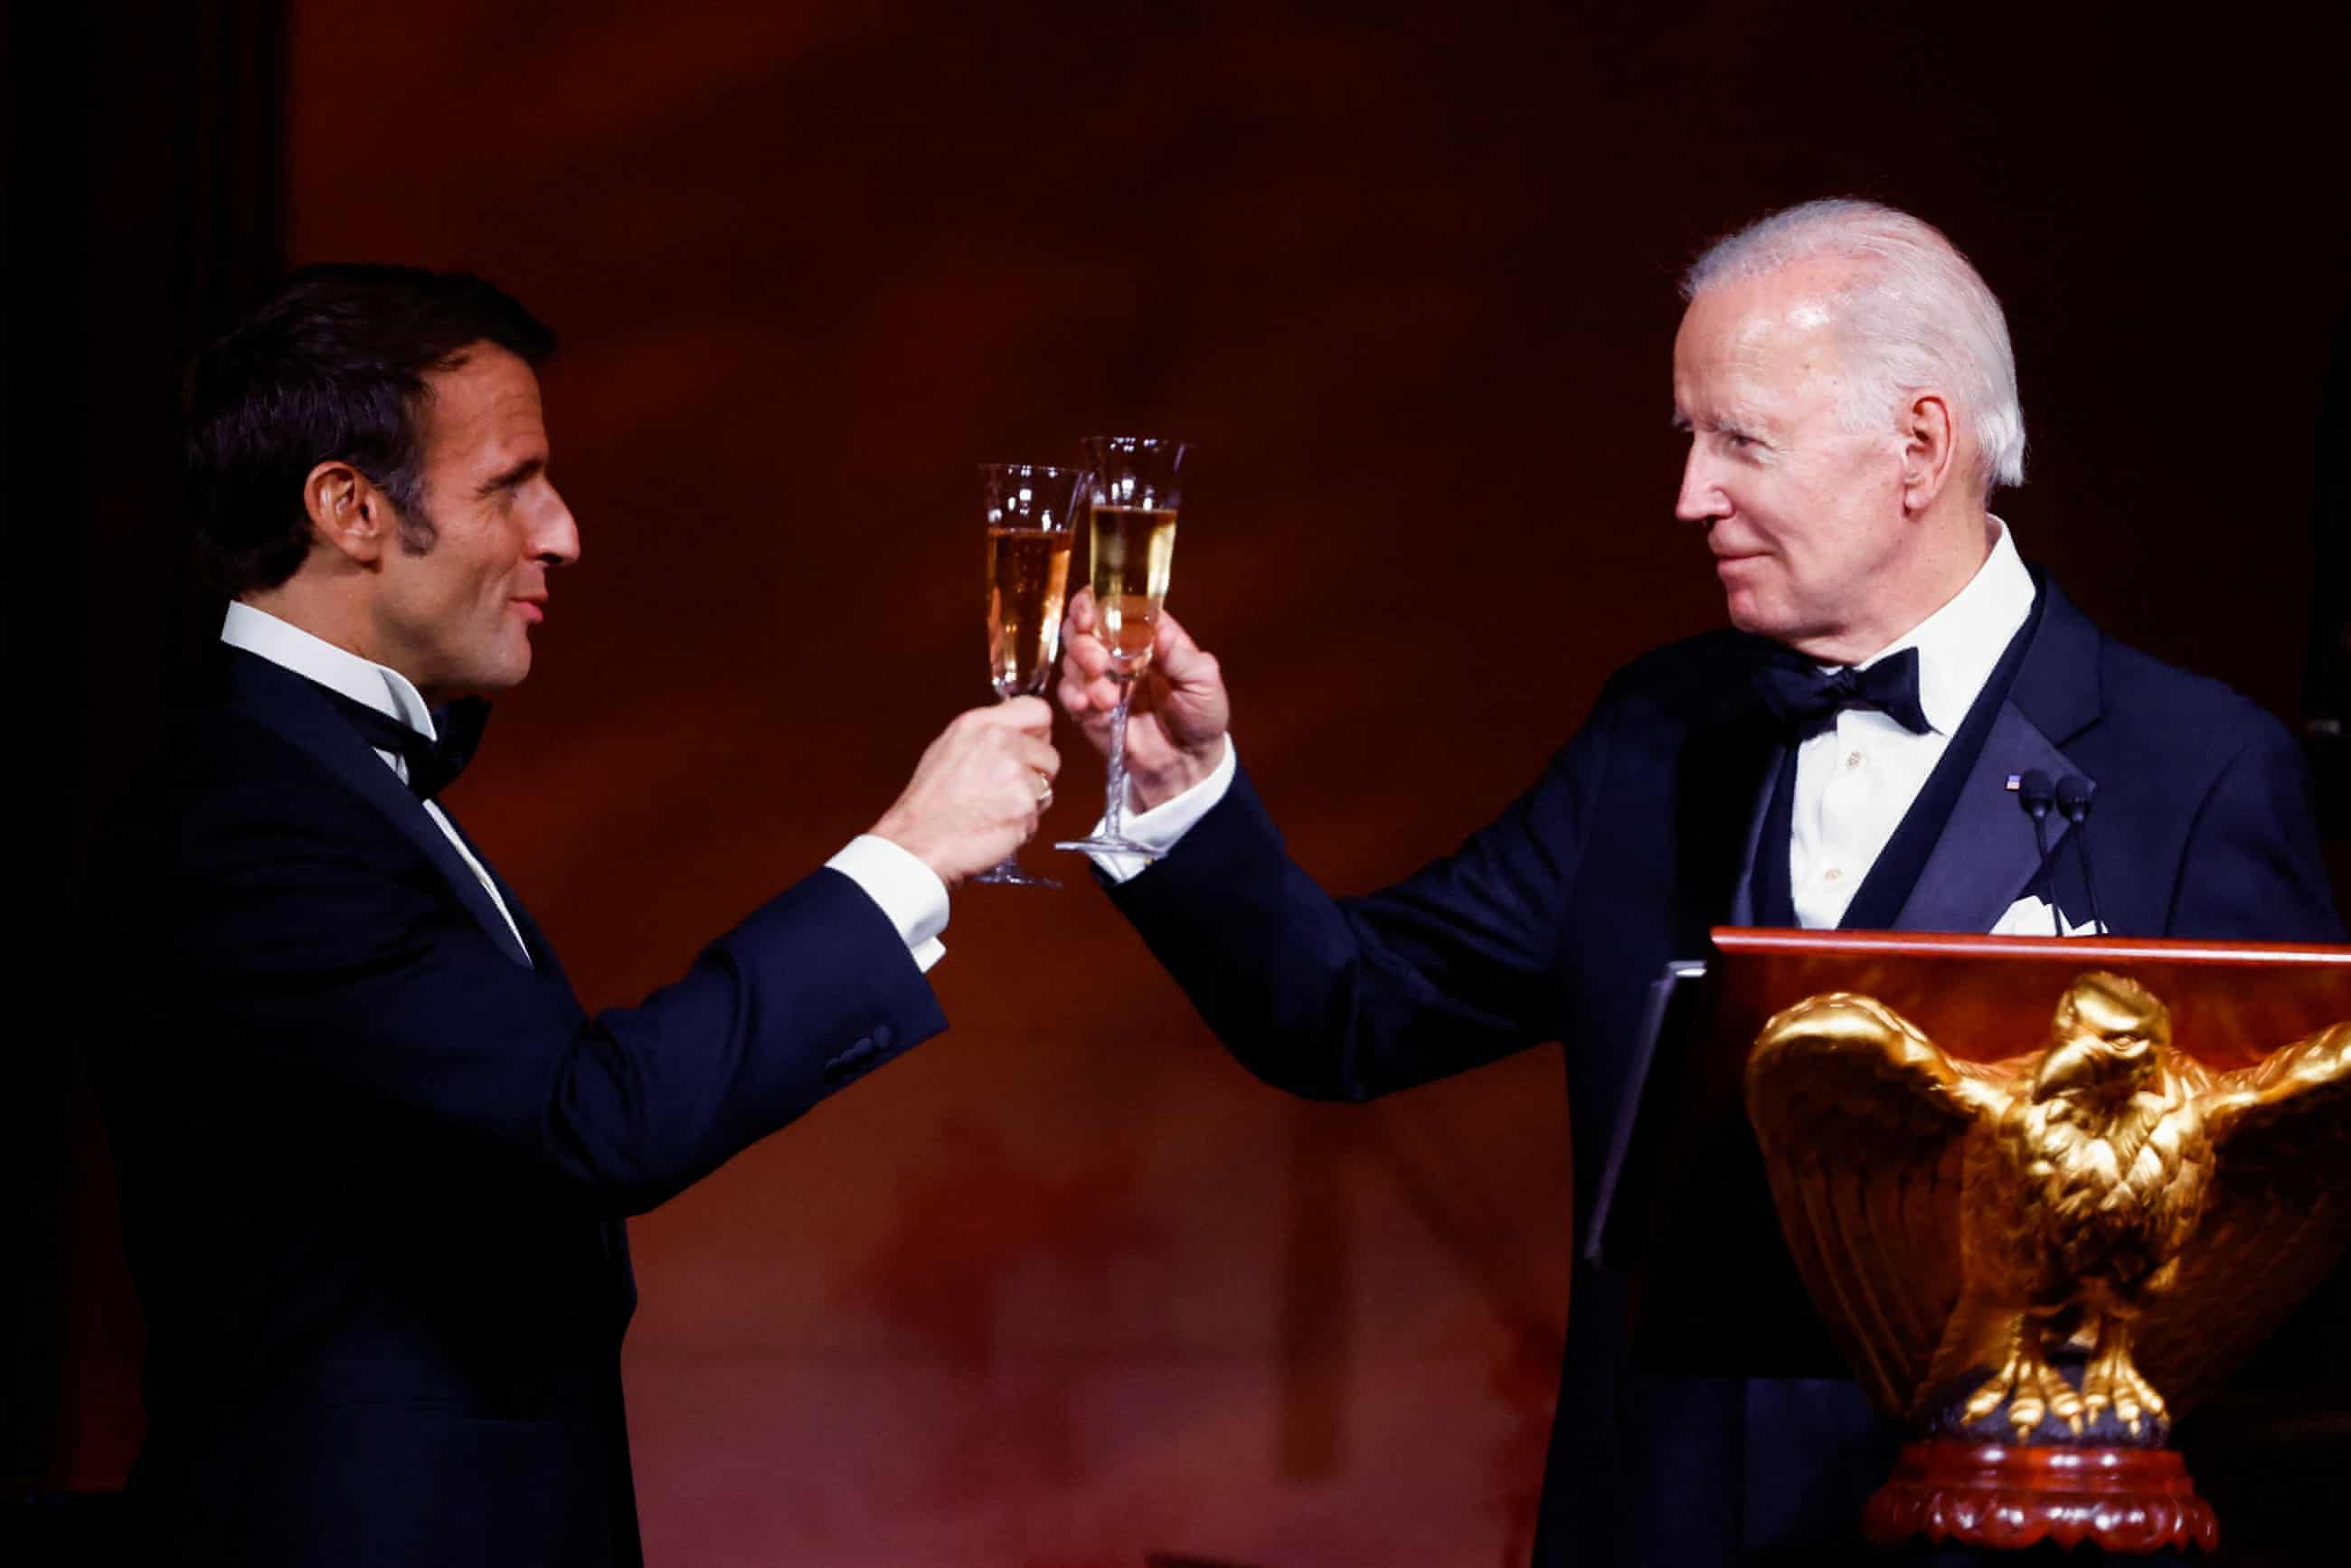 Biden attempts to restore America’s global standing with state dinner pageantry (theguardian.com)